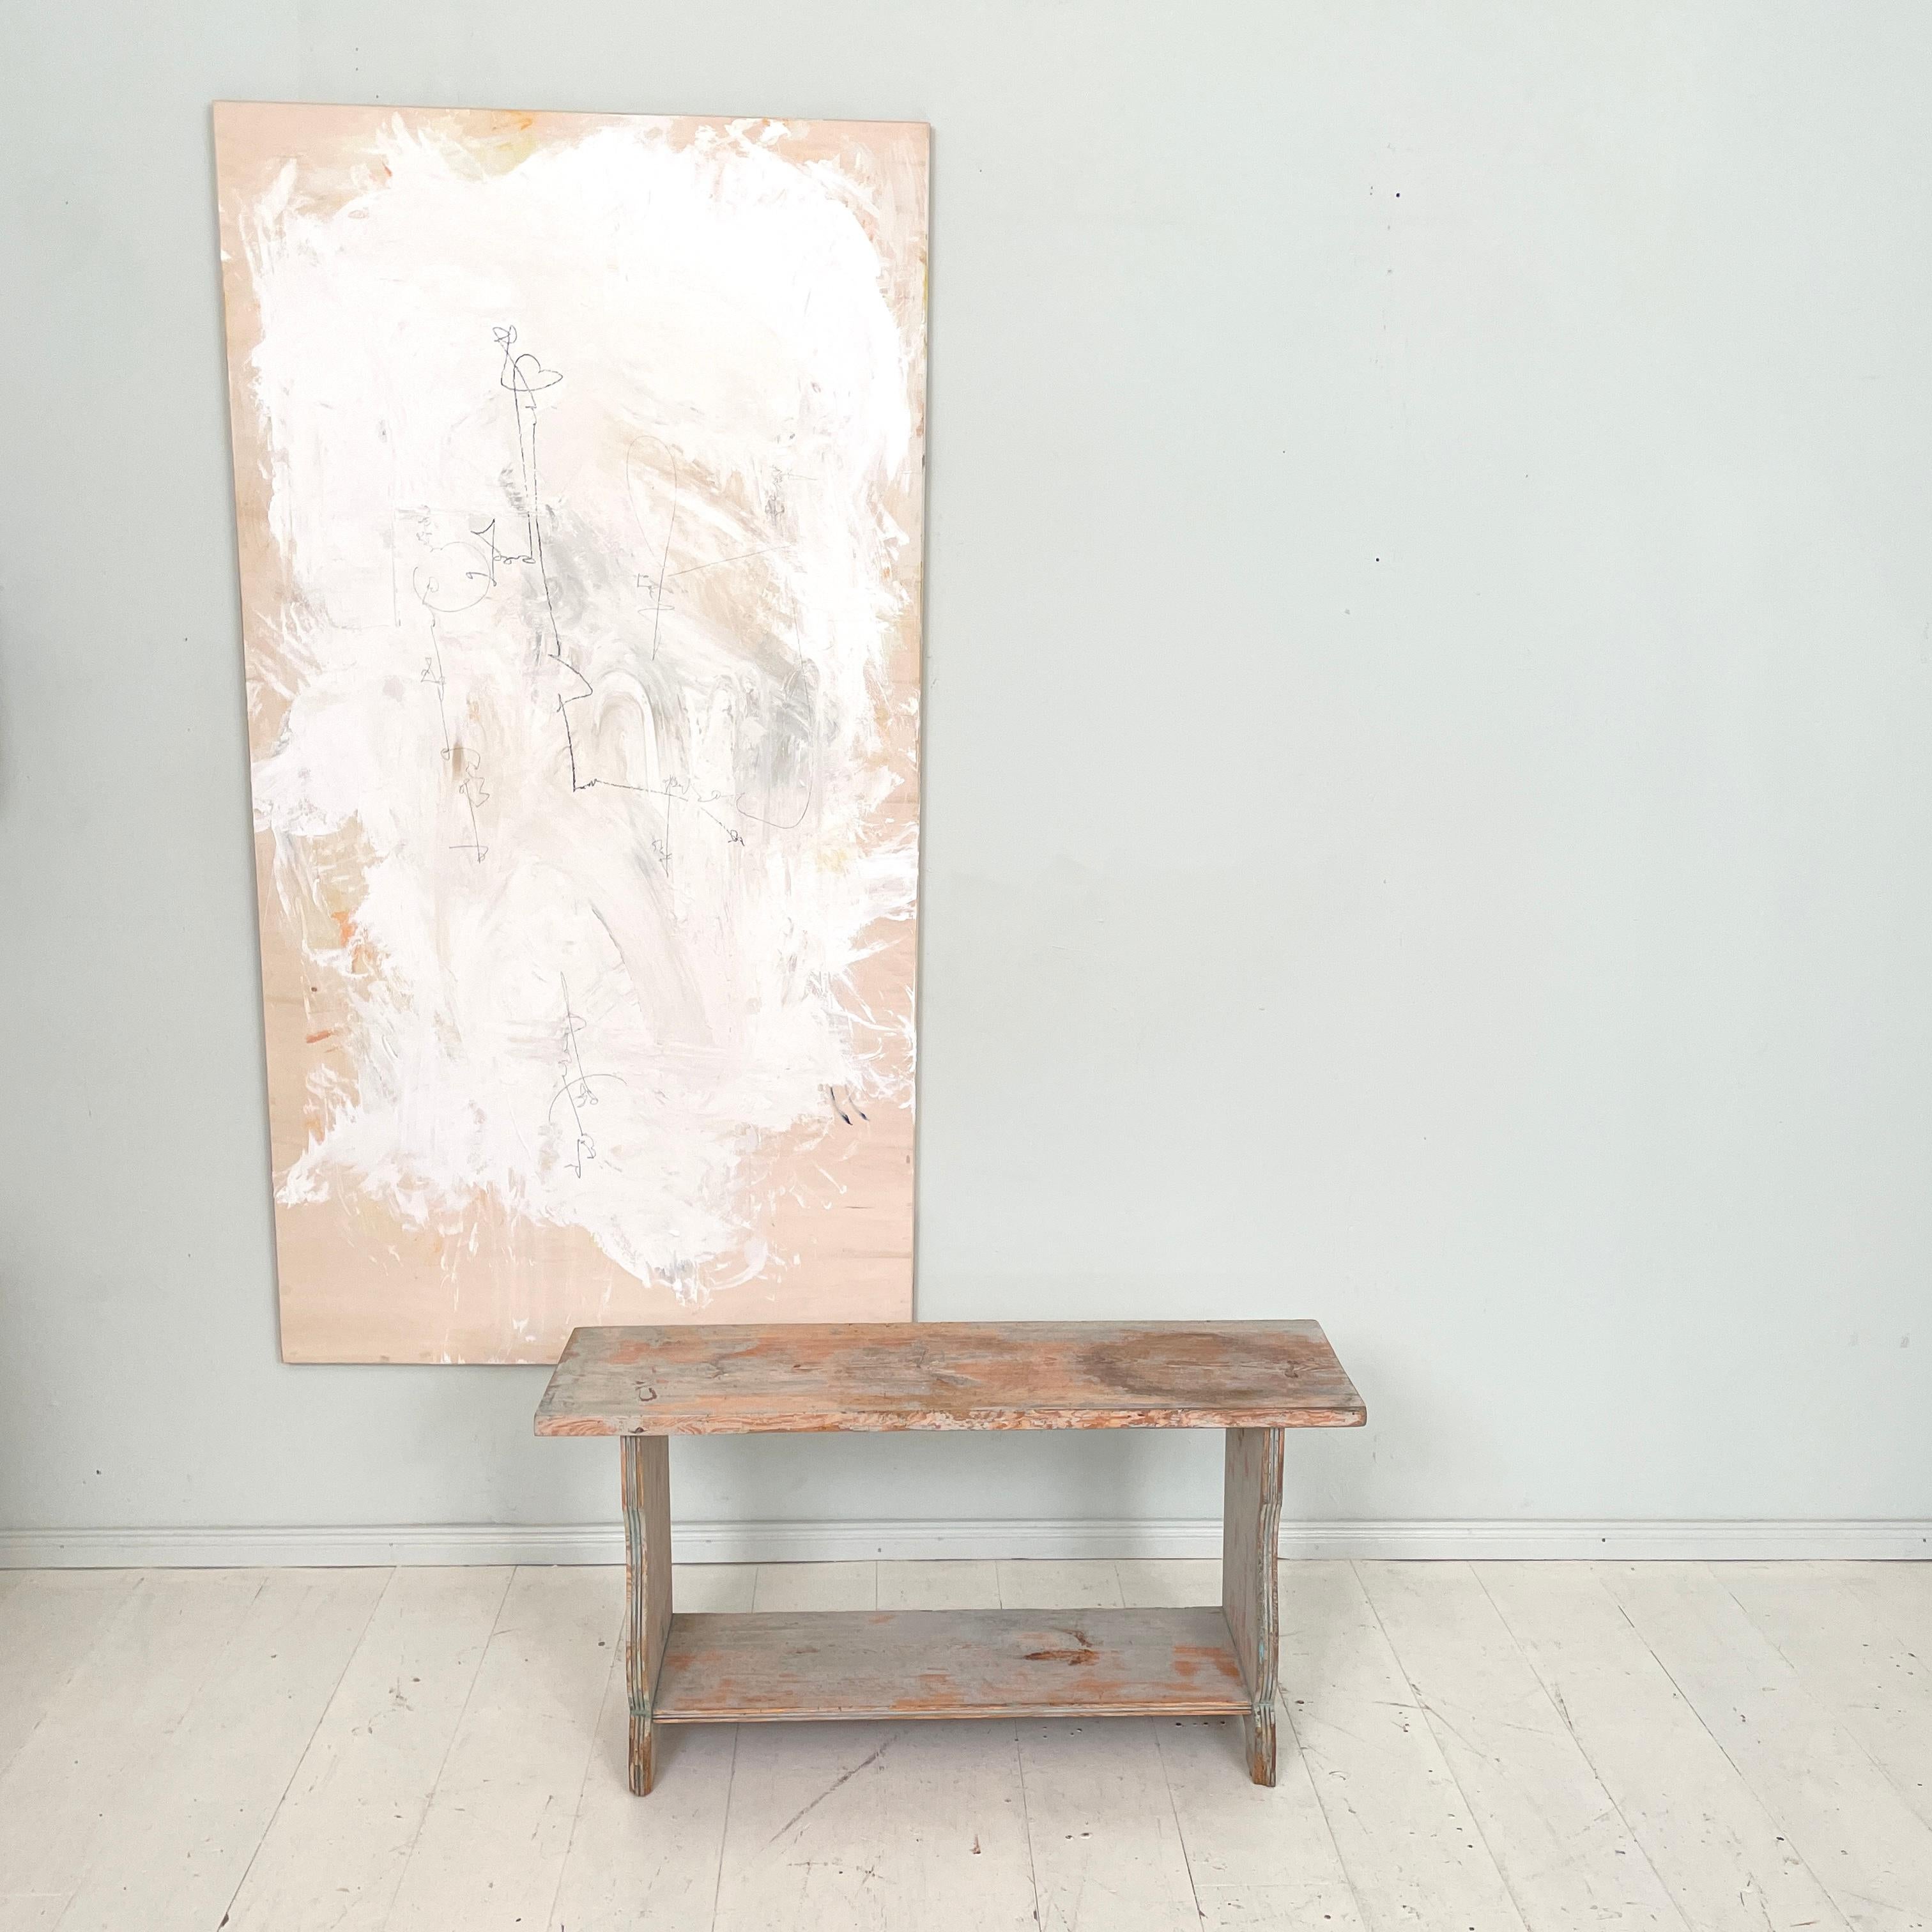 This Gustavian bench is from the Swedish country side. It was made around 1820 and is in untouched original condition with genuine wear and patina. The condition of the bench is the authentic result of 200 years of use. 
A unique piece which is a